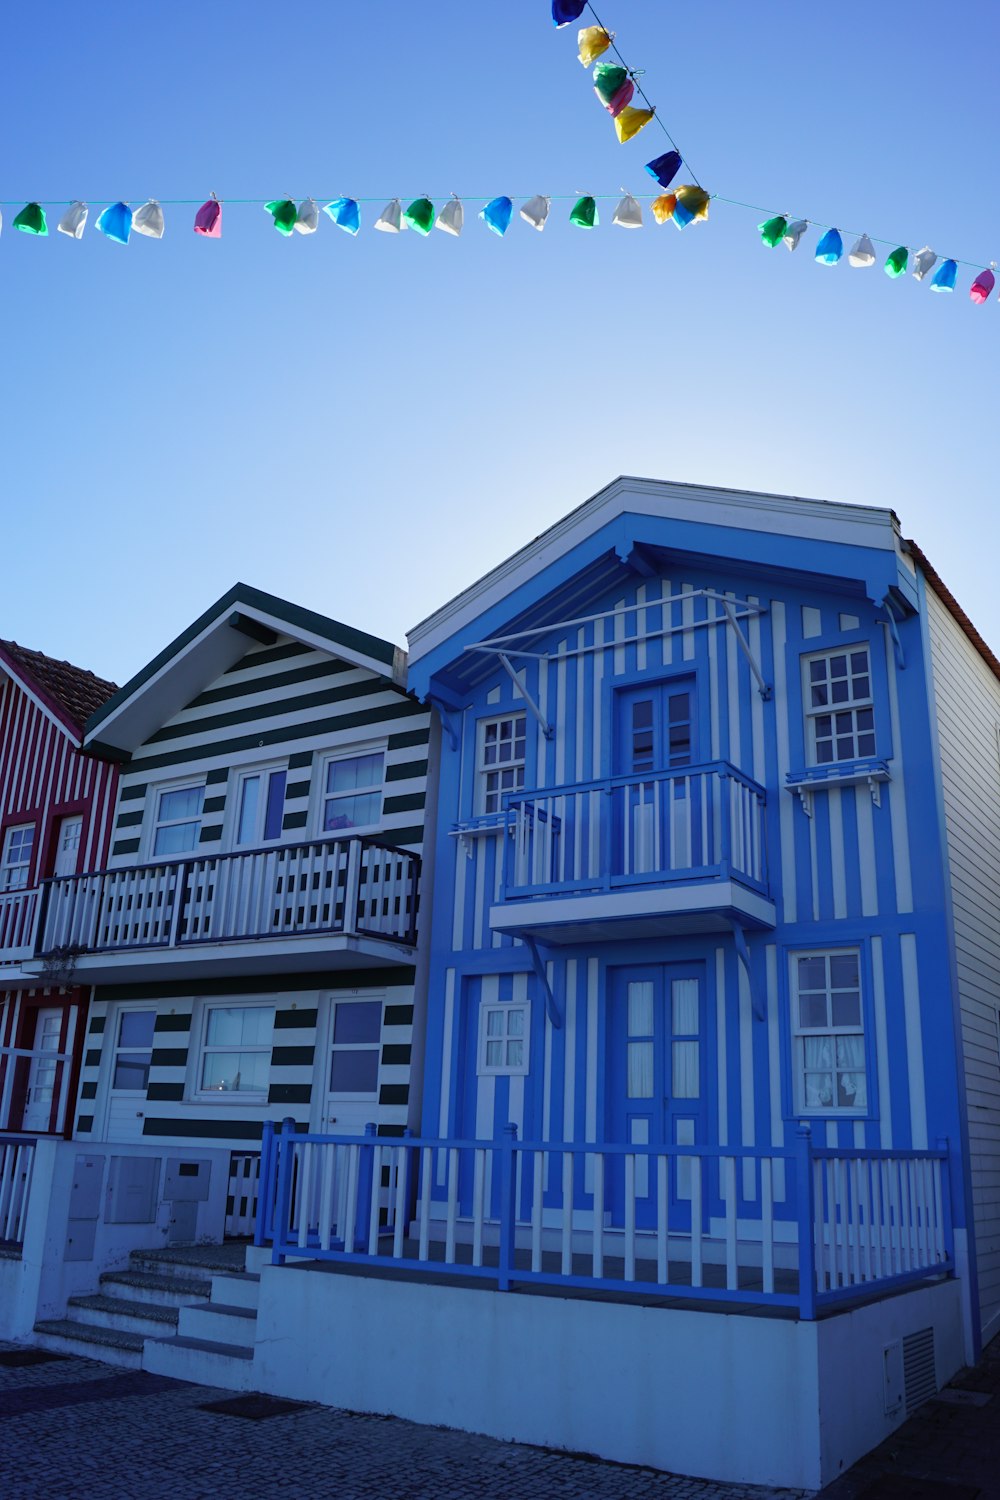 a row of houses with flags